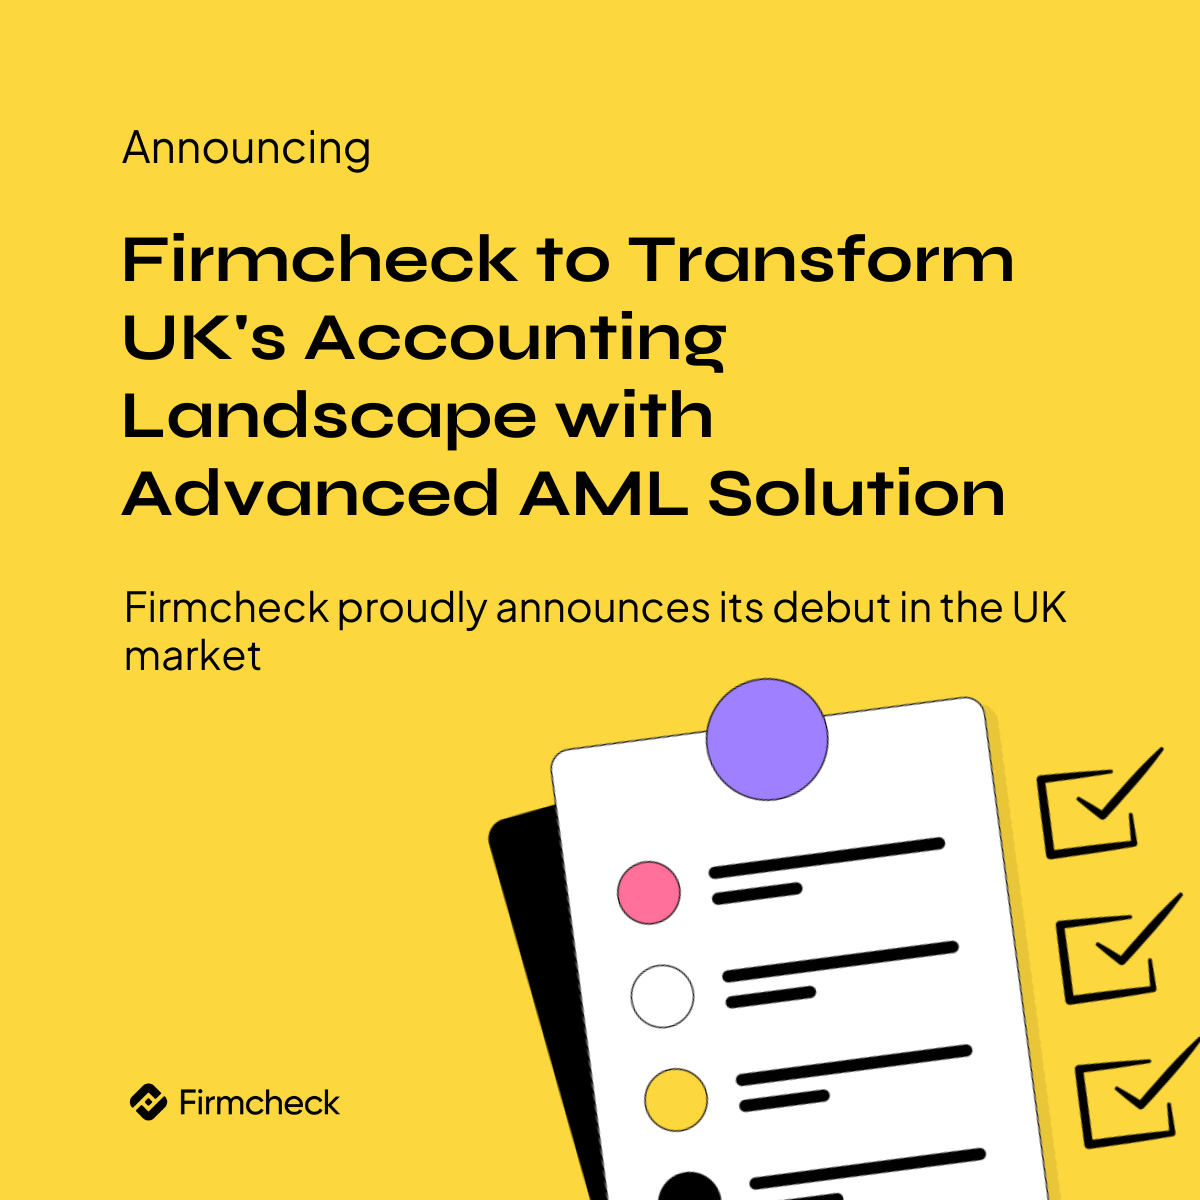 Firmcheck Set to Transform UK's Accounting Landscape with Advanced AML Solutions logo